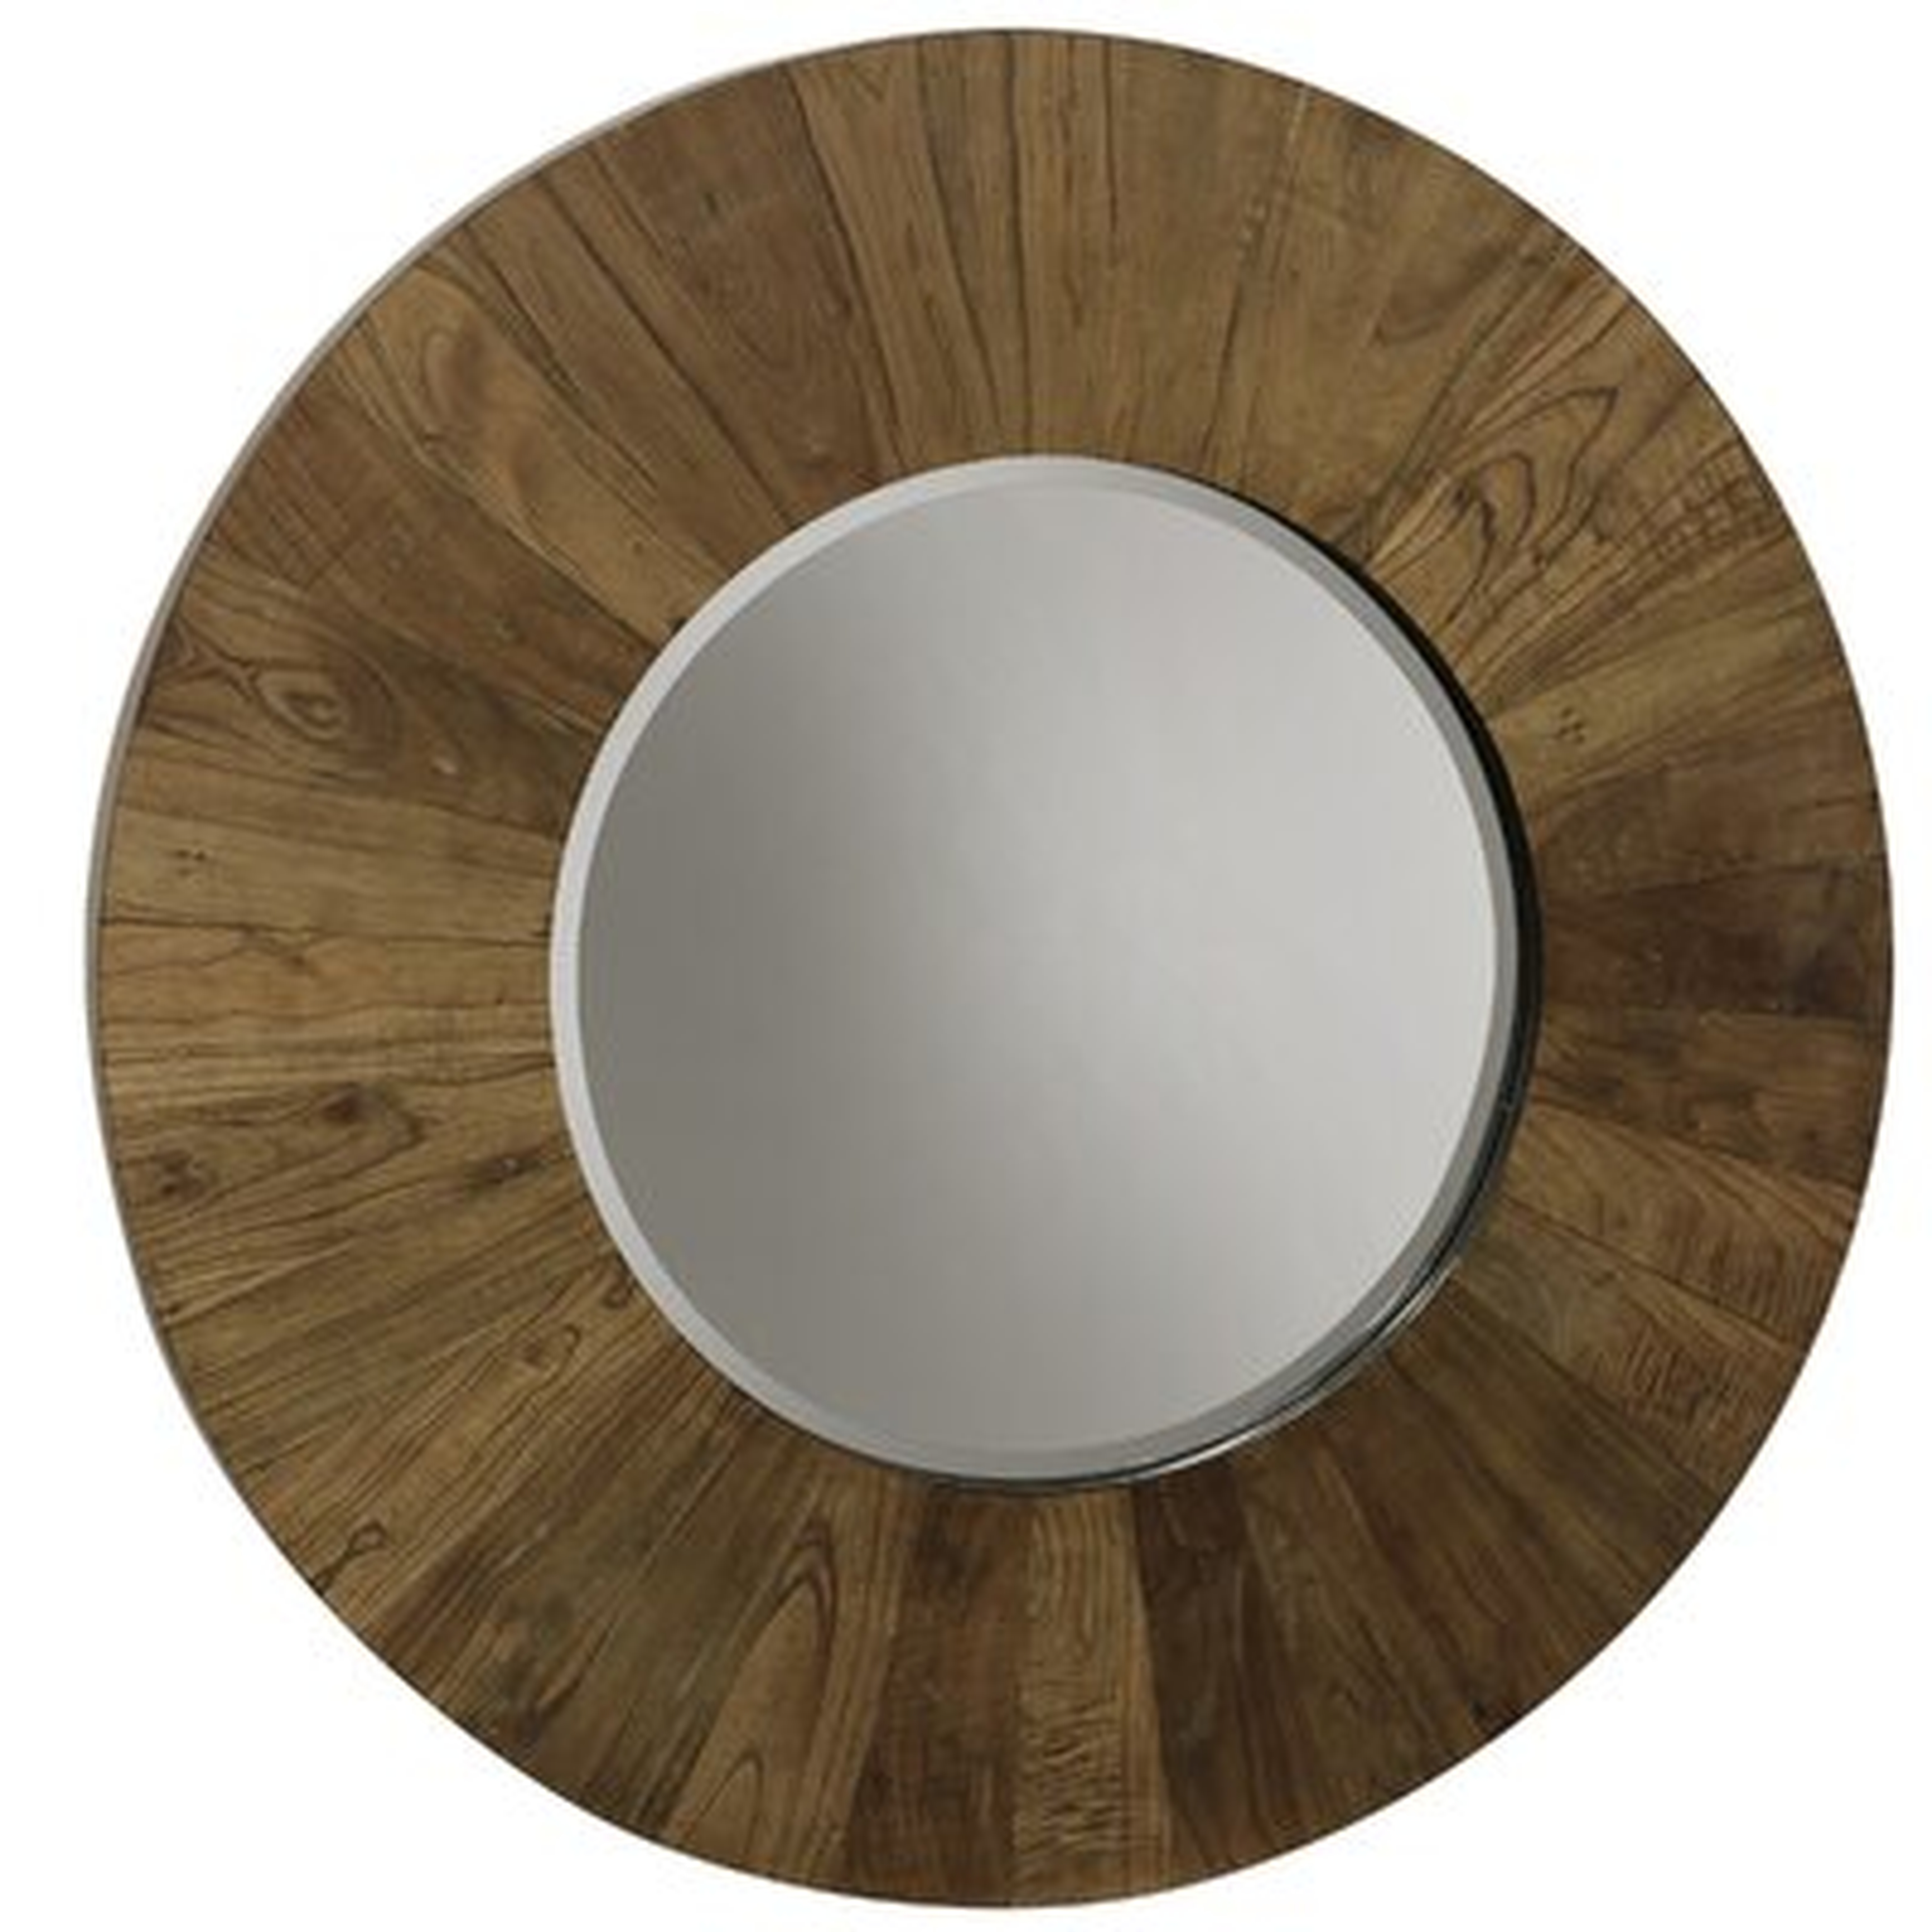 Style Craft Veneer Natural Wood - Natural Tone Wood Frame Round Mirror With Clear Beveled Glass - Wayfair